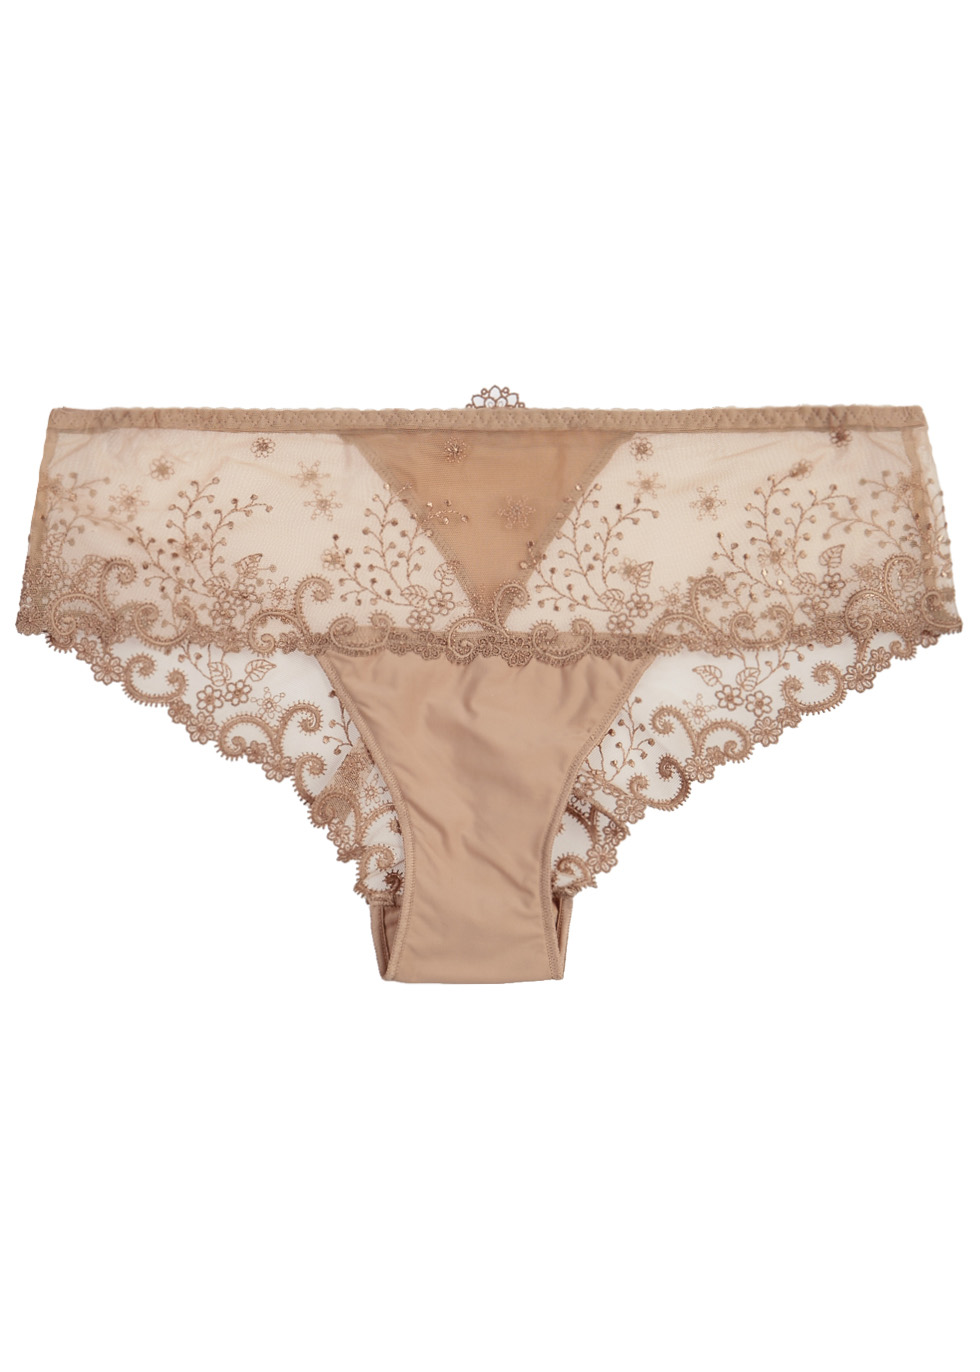 Delice embroidered tulle briefs